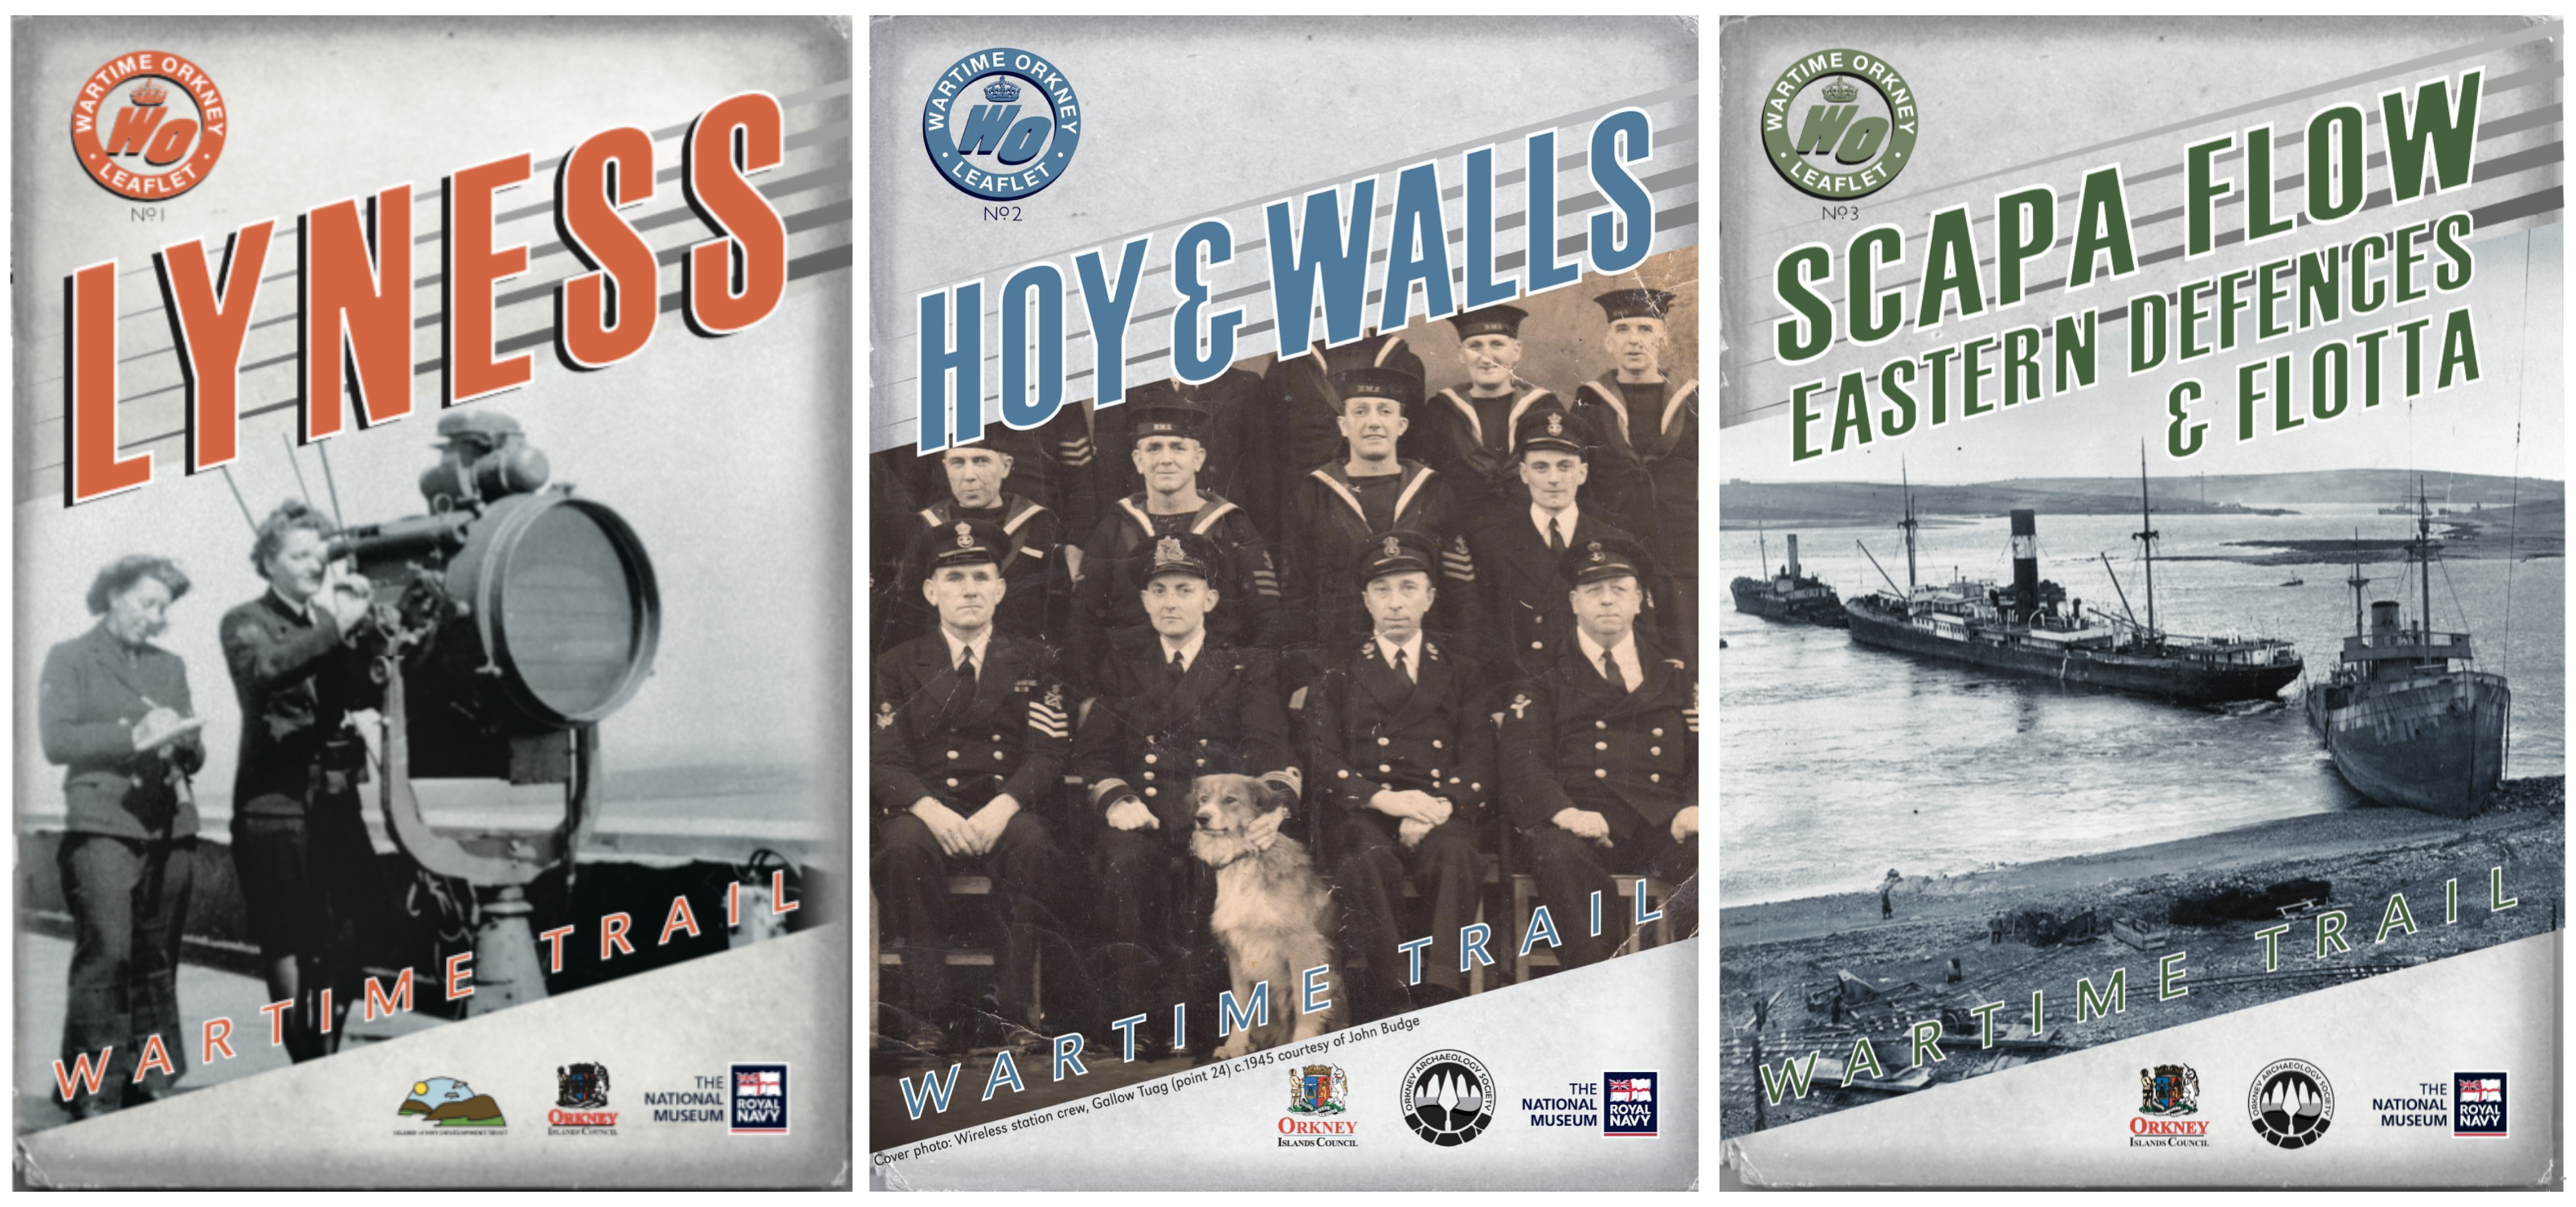 Screenshots of three covers of newsletters showing black and white photos of servicepeople in the 20th century